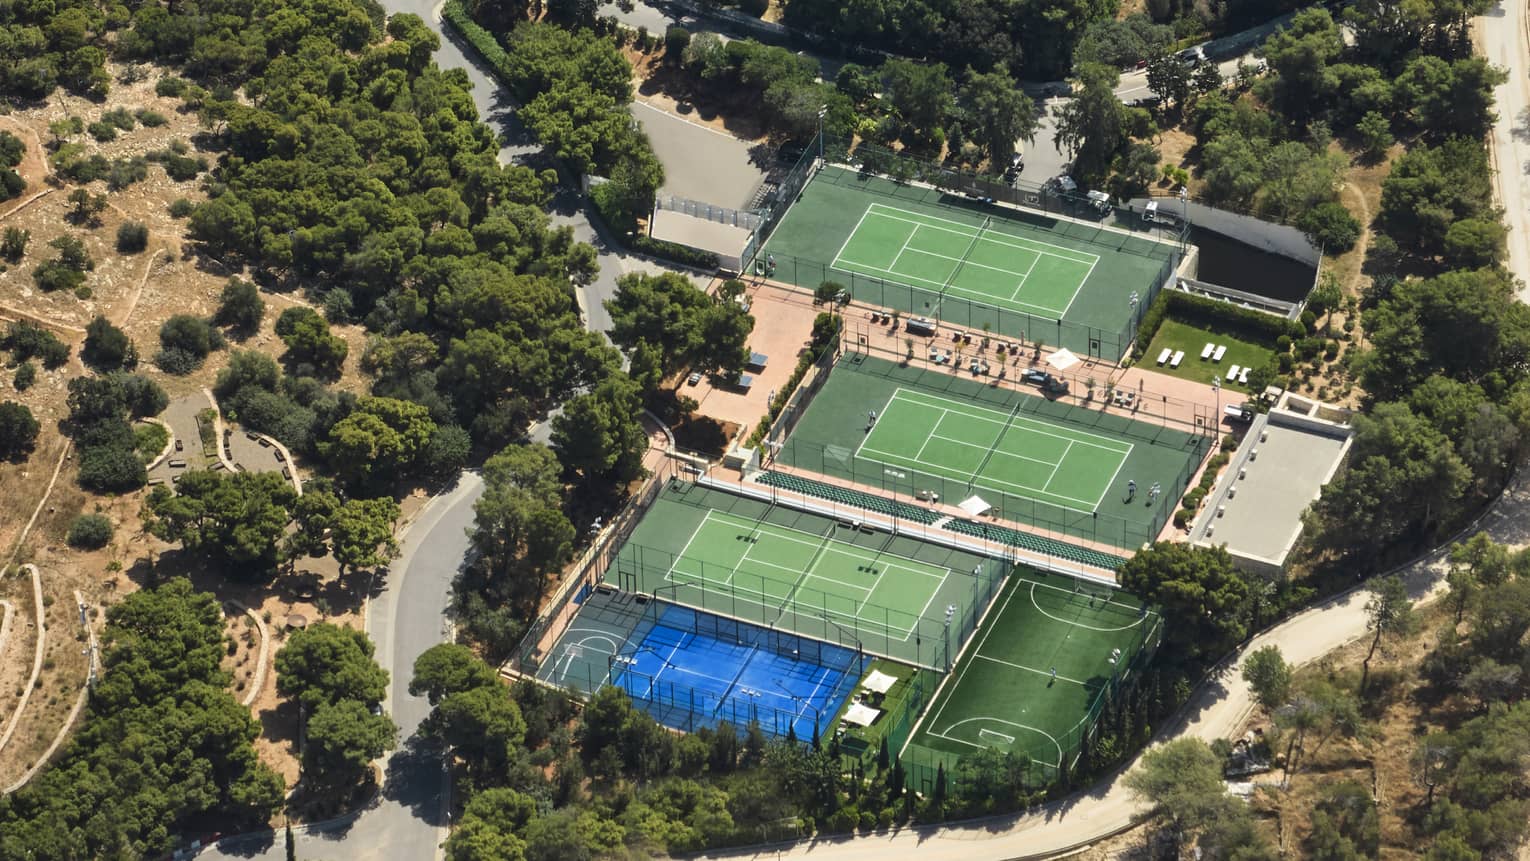 Aerial view of one padel and three tennis courts